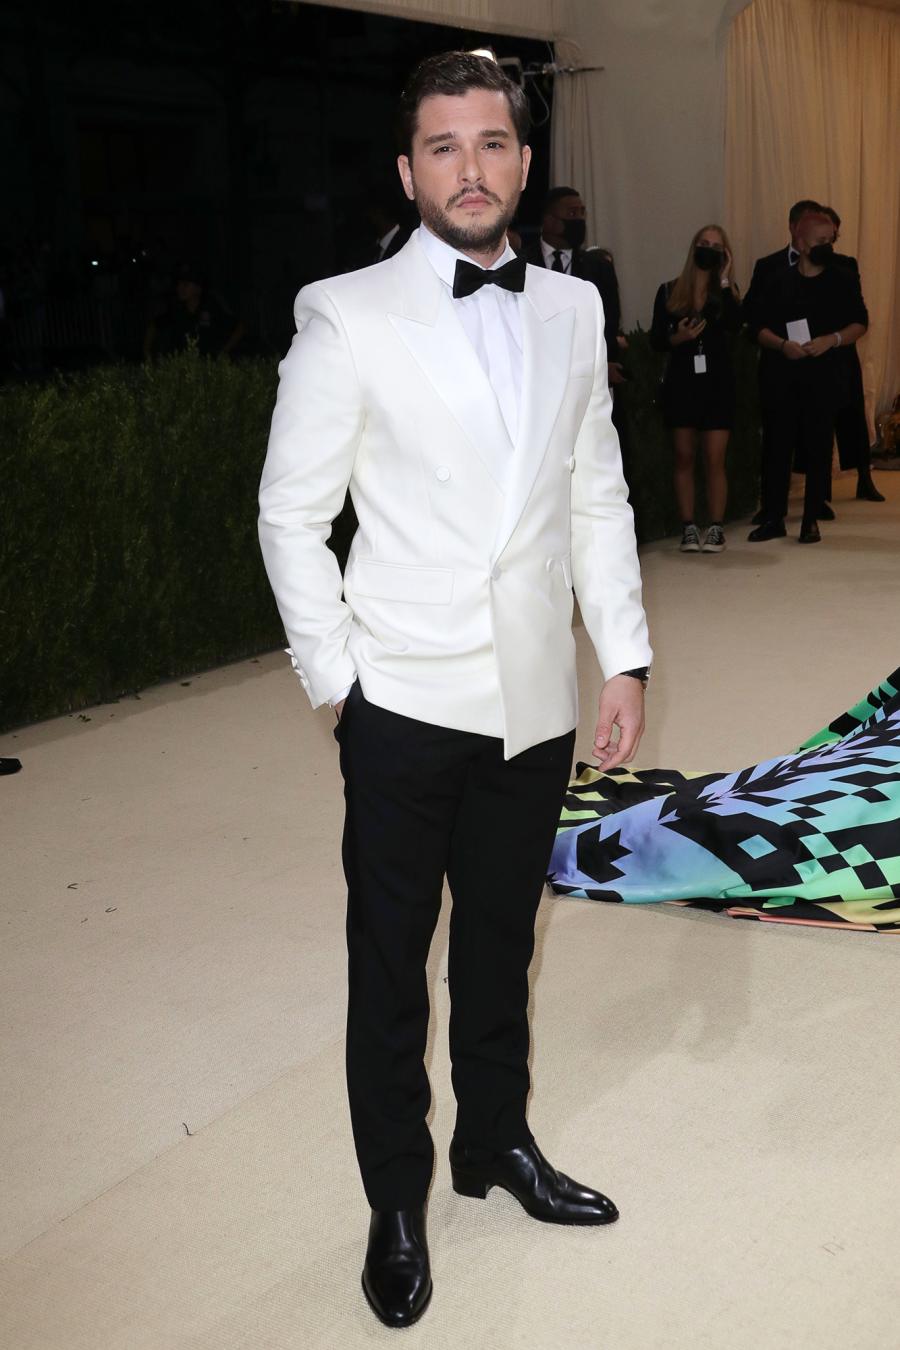 These Were the 10 Best Dressed Men at the 2021 Met Gala